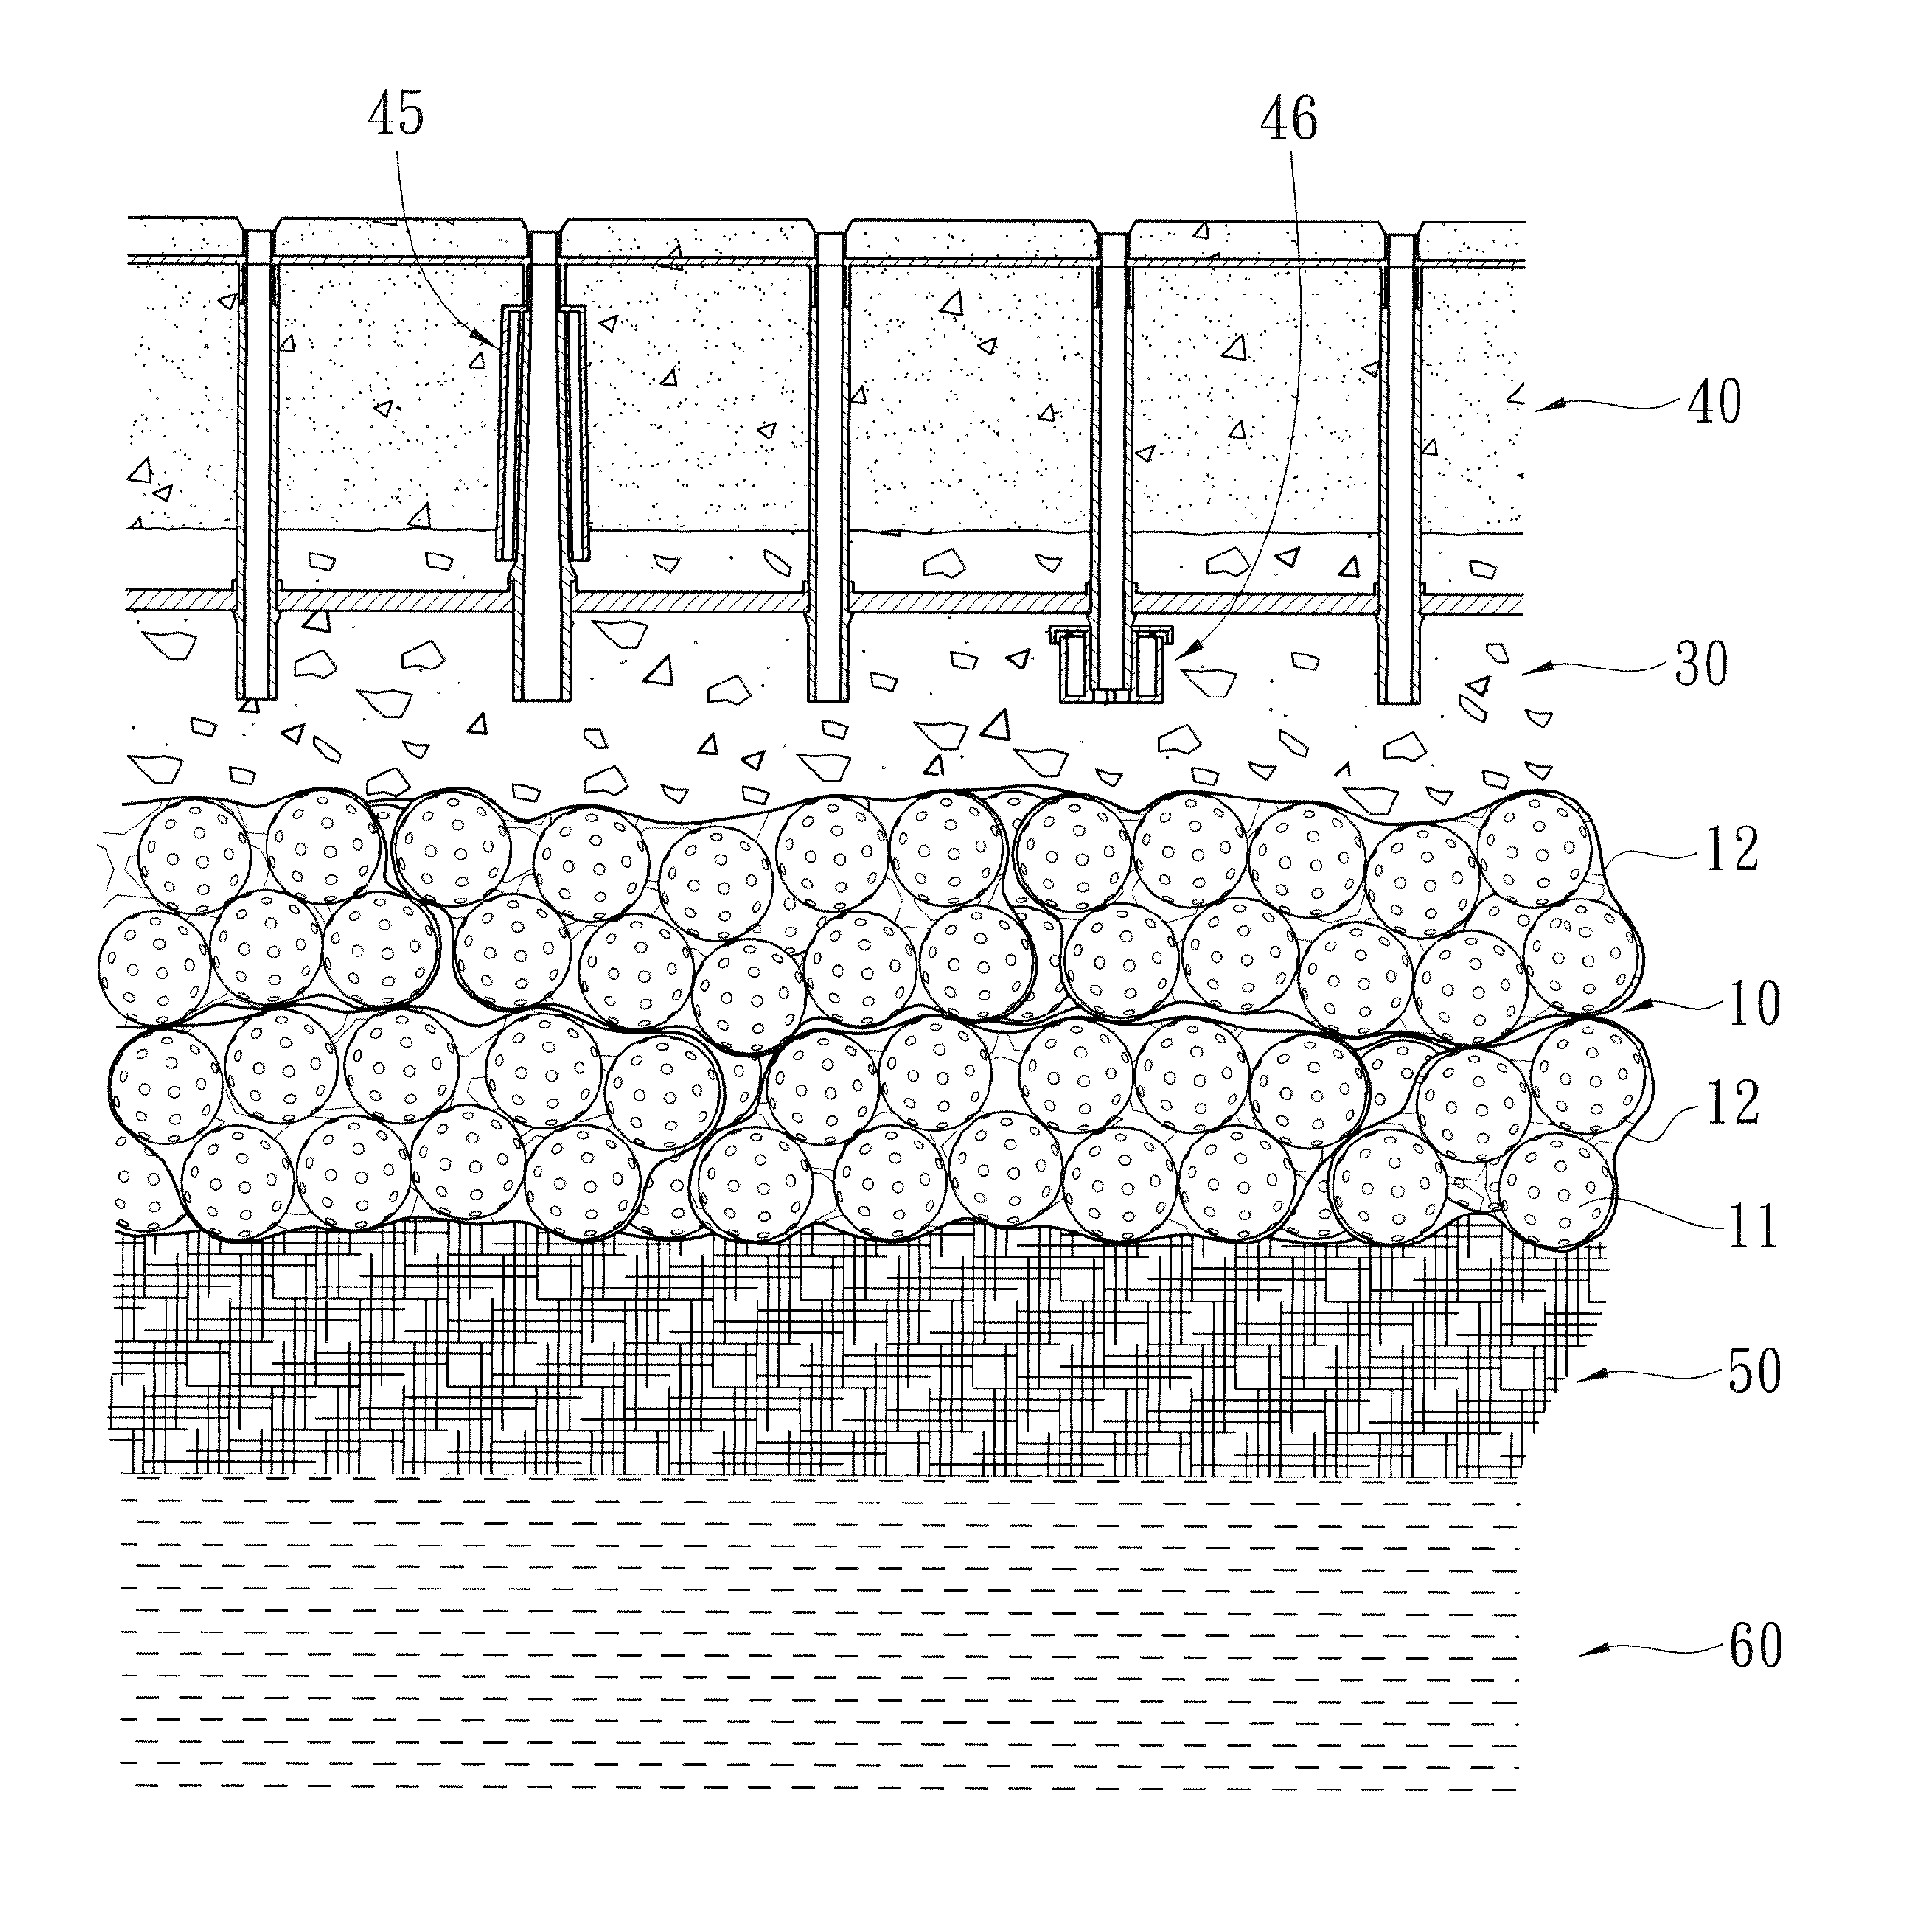 Method for manufacturing artificial paving that help improving global warming